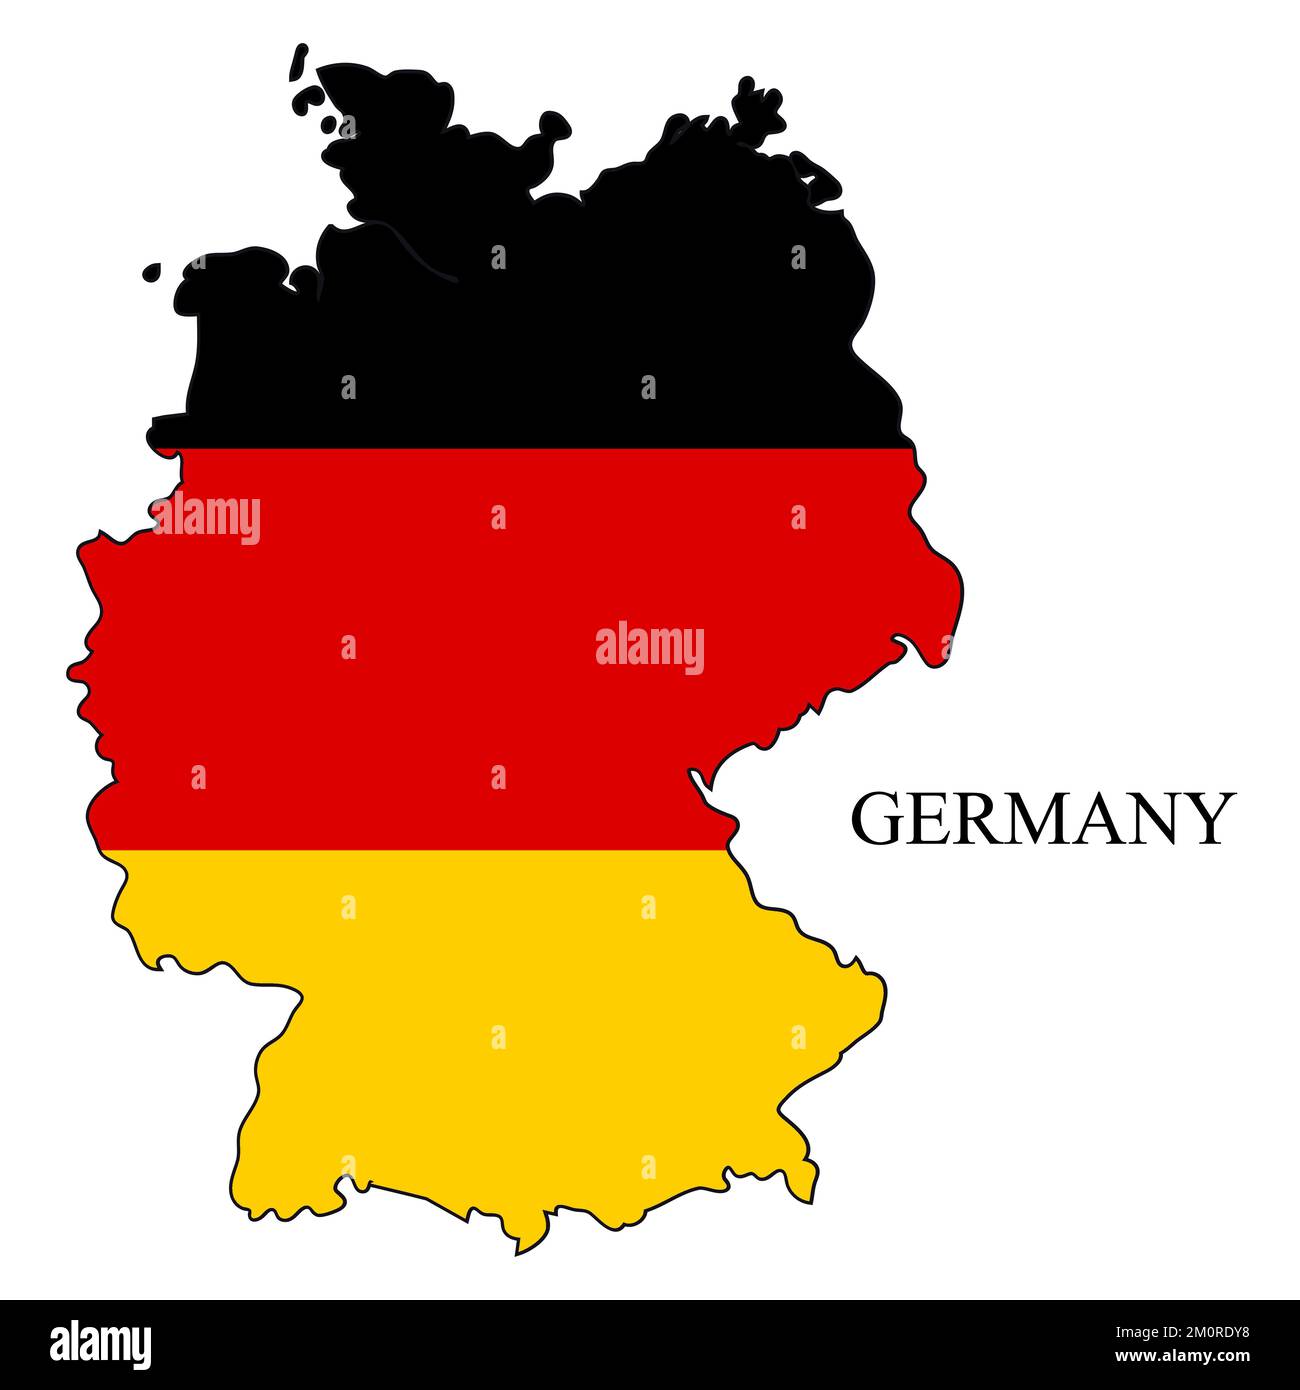 Germany map vector illustration. Global economy. Famous country. Western Europe. Europe. Stock Vector